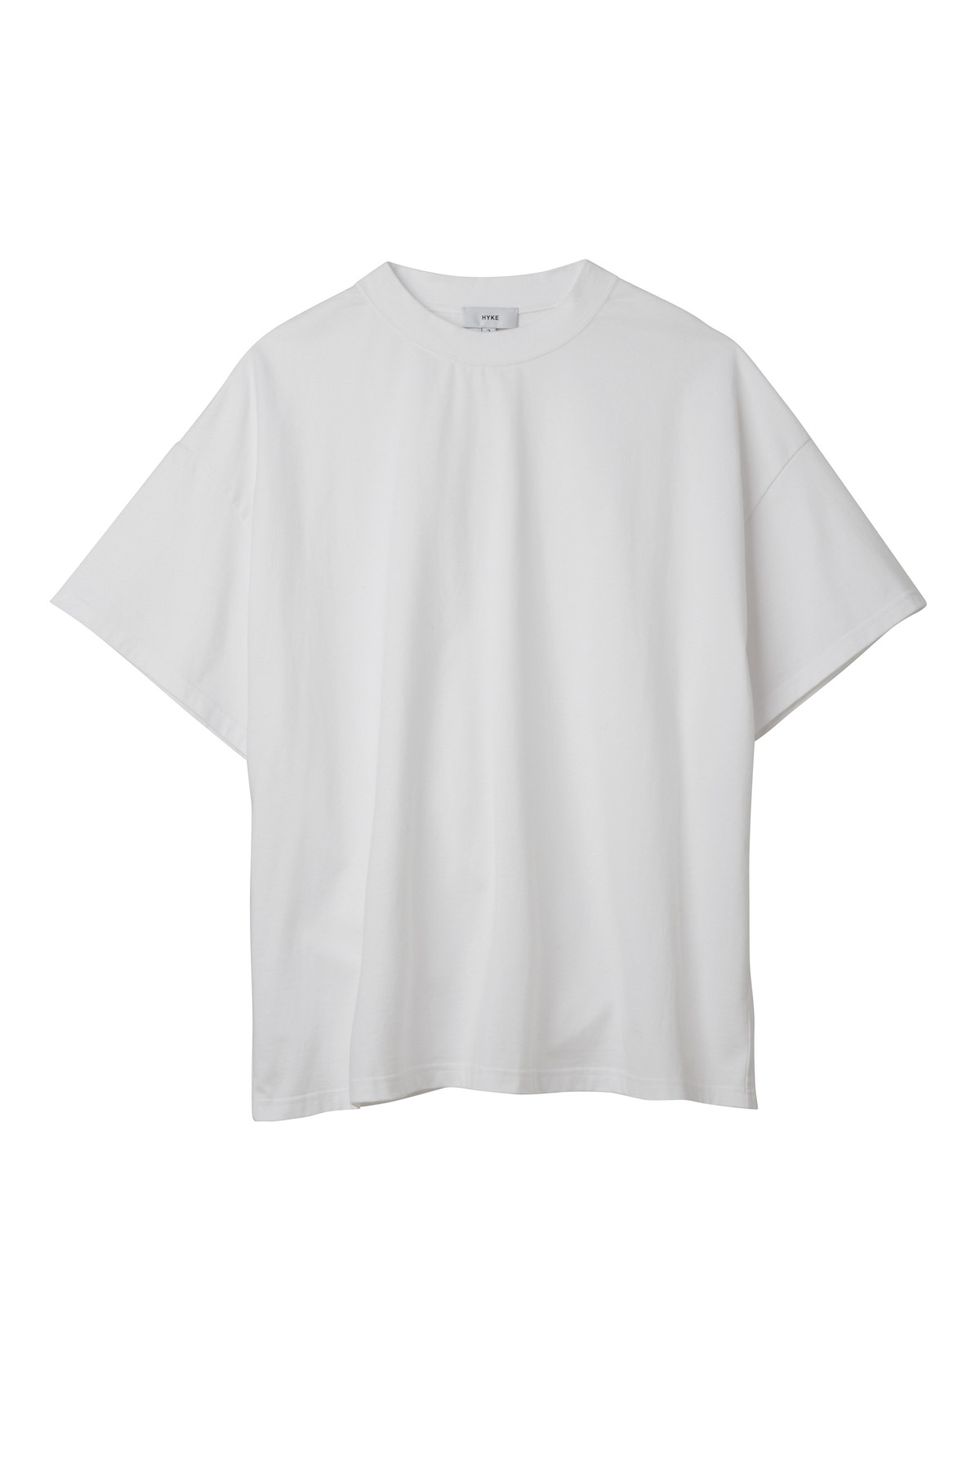 White, Clothing, T-shirt, Sleeve, Top, Crop top, Blouse, Outerwear, Neck, Shirt, 